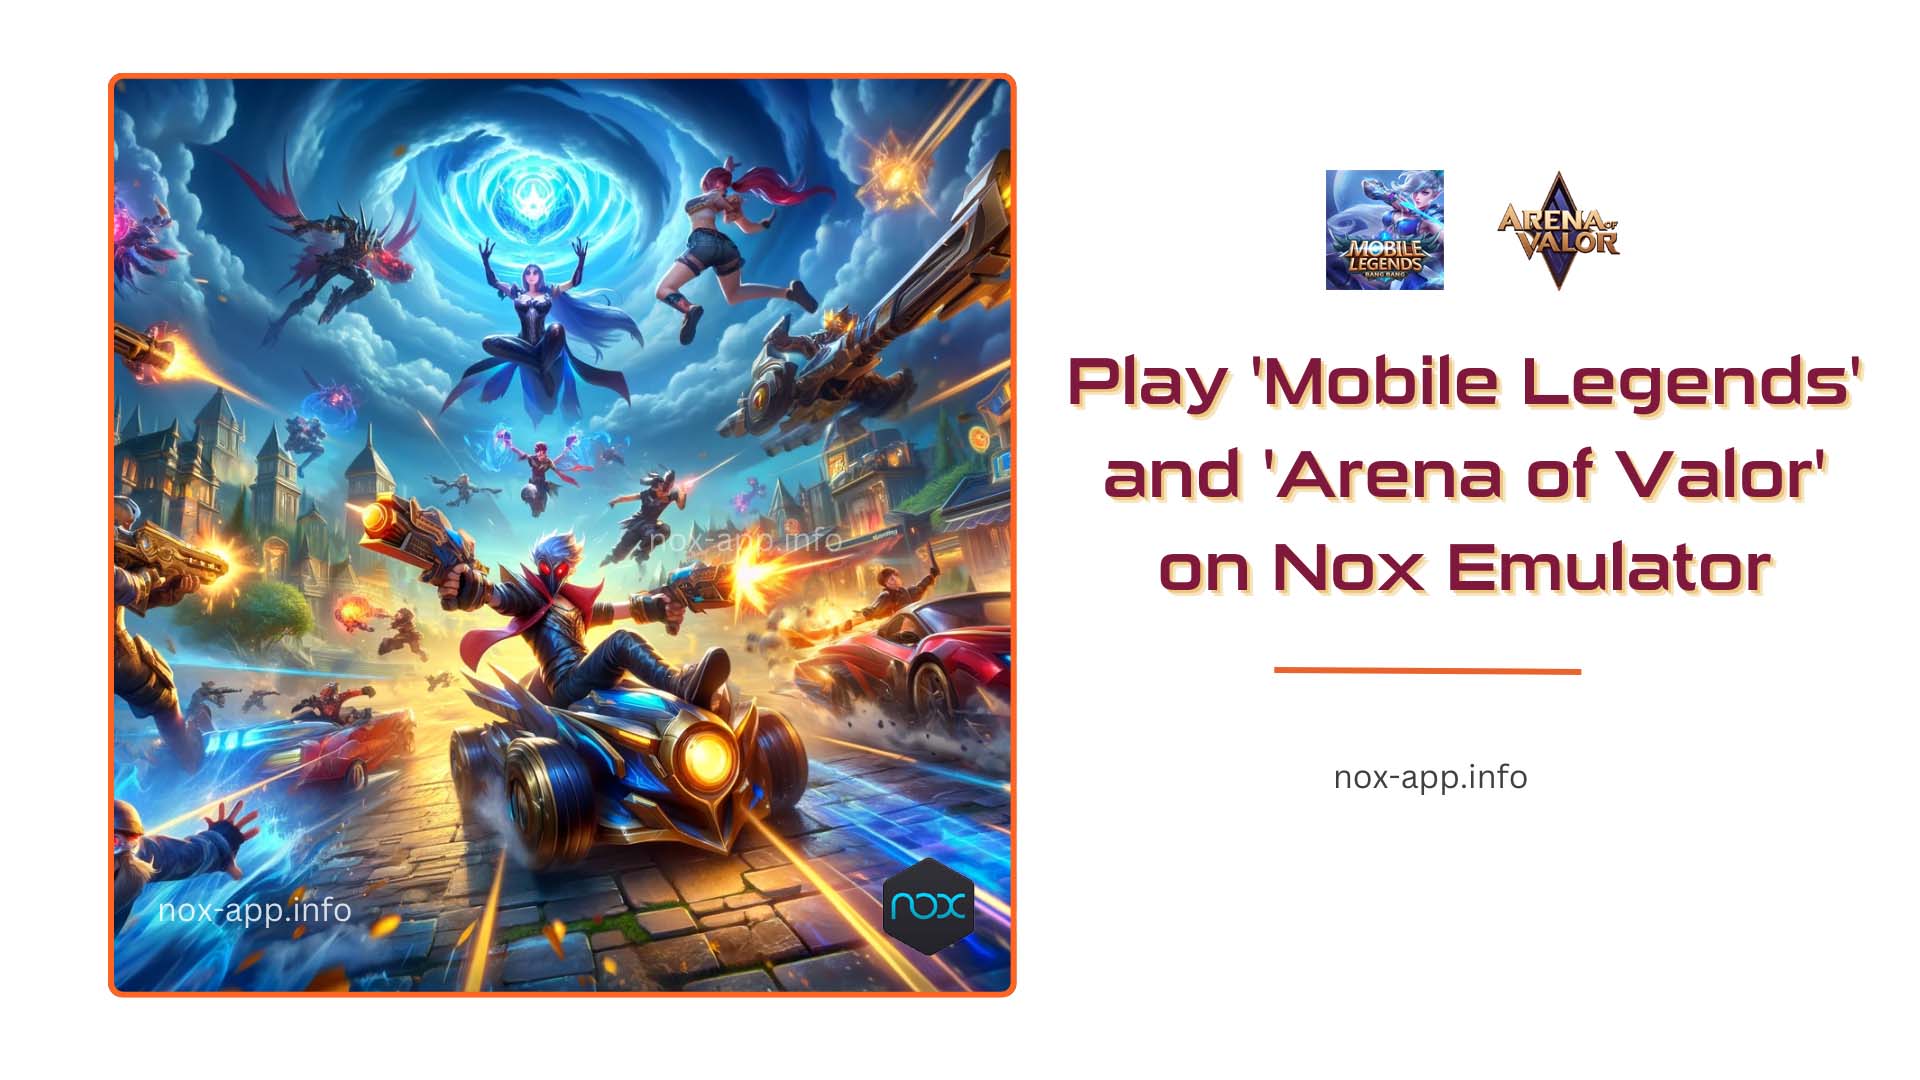 mobile-legends-and-arena-of-valor-games-ply-on-nox